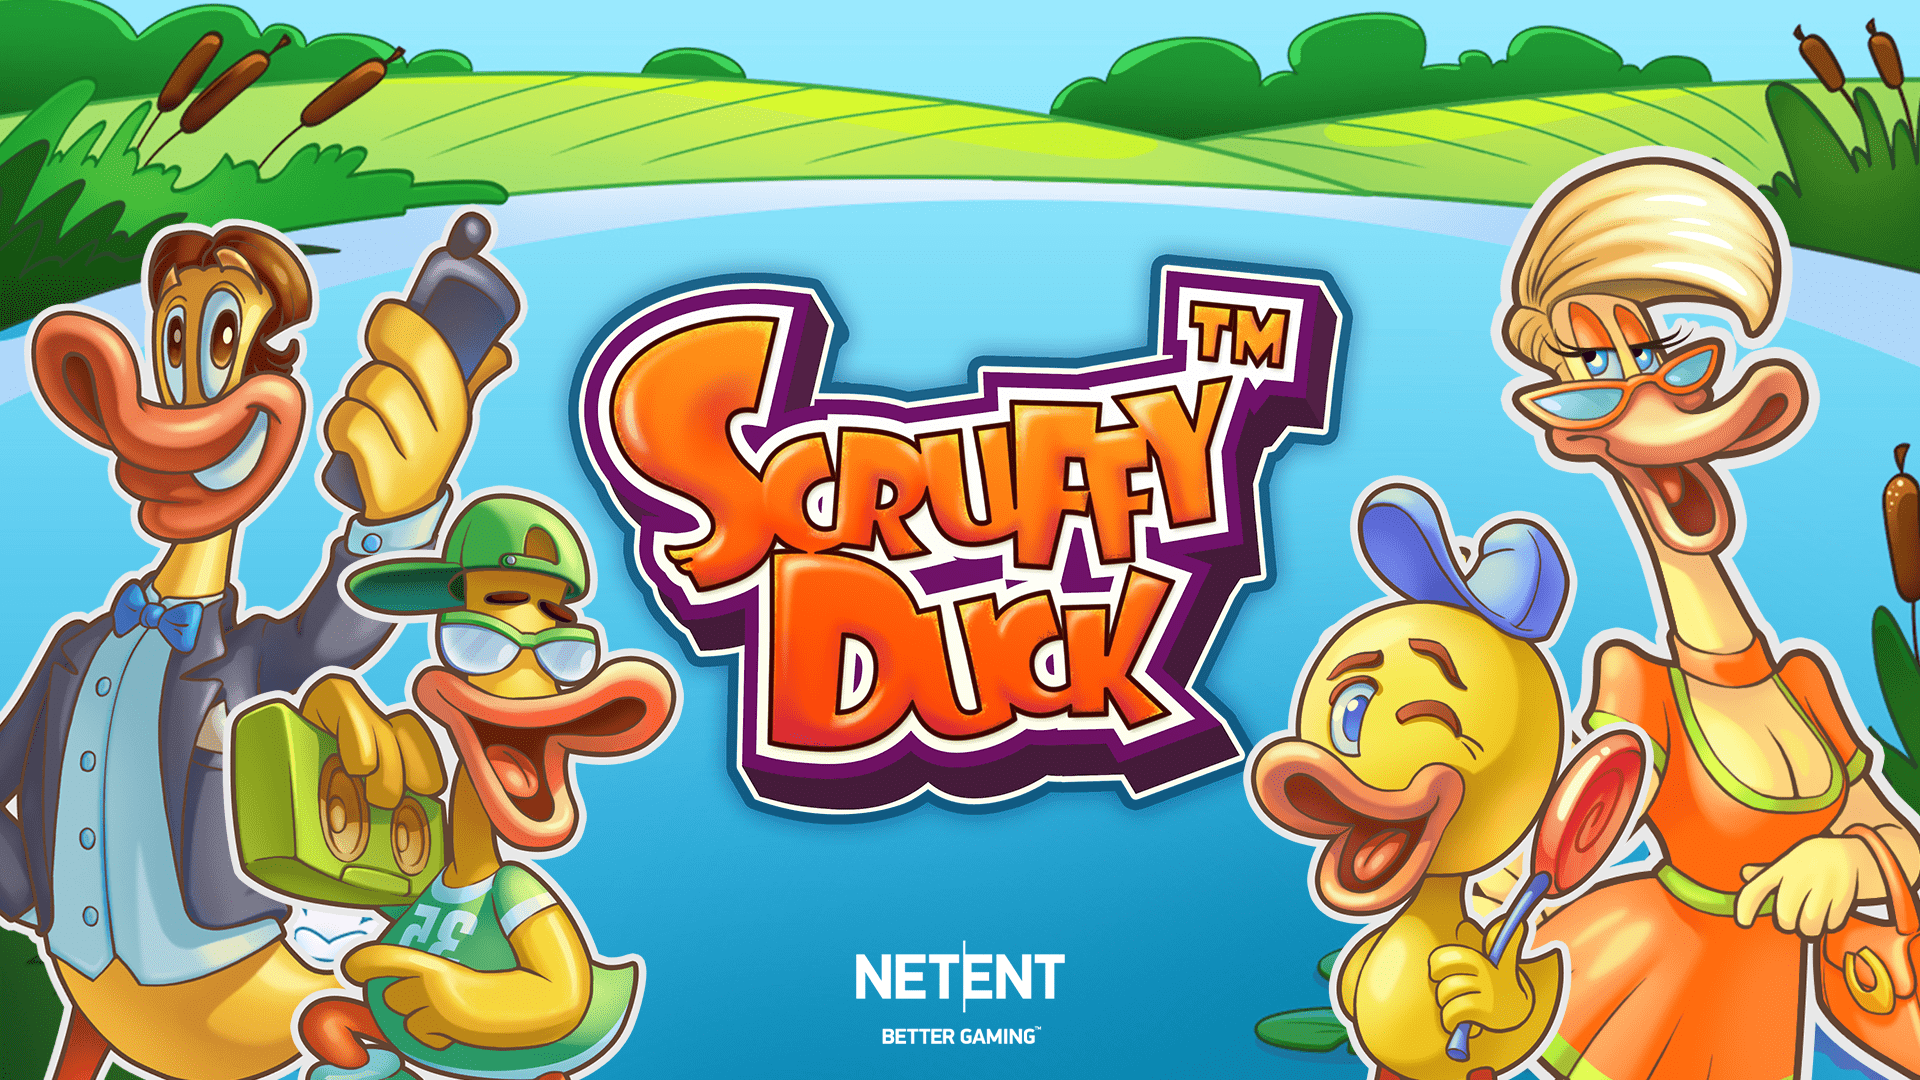 netent-review-of-scruffy-duck-slot-playbetusa